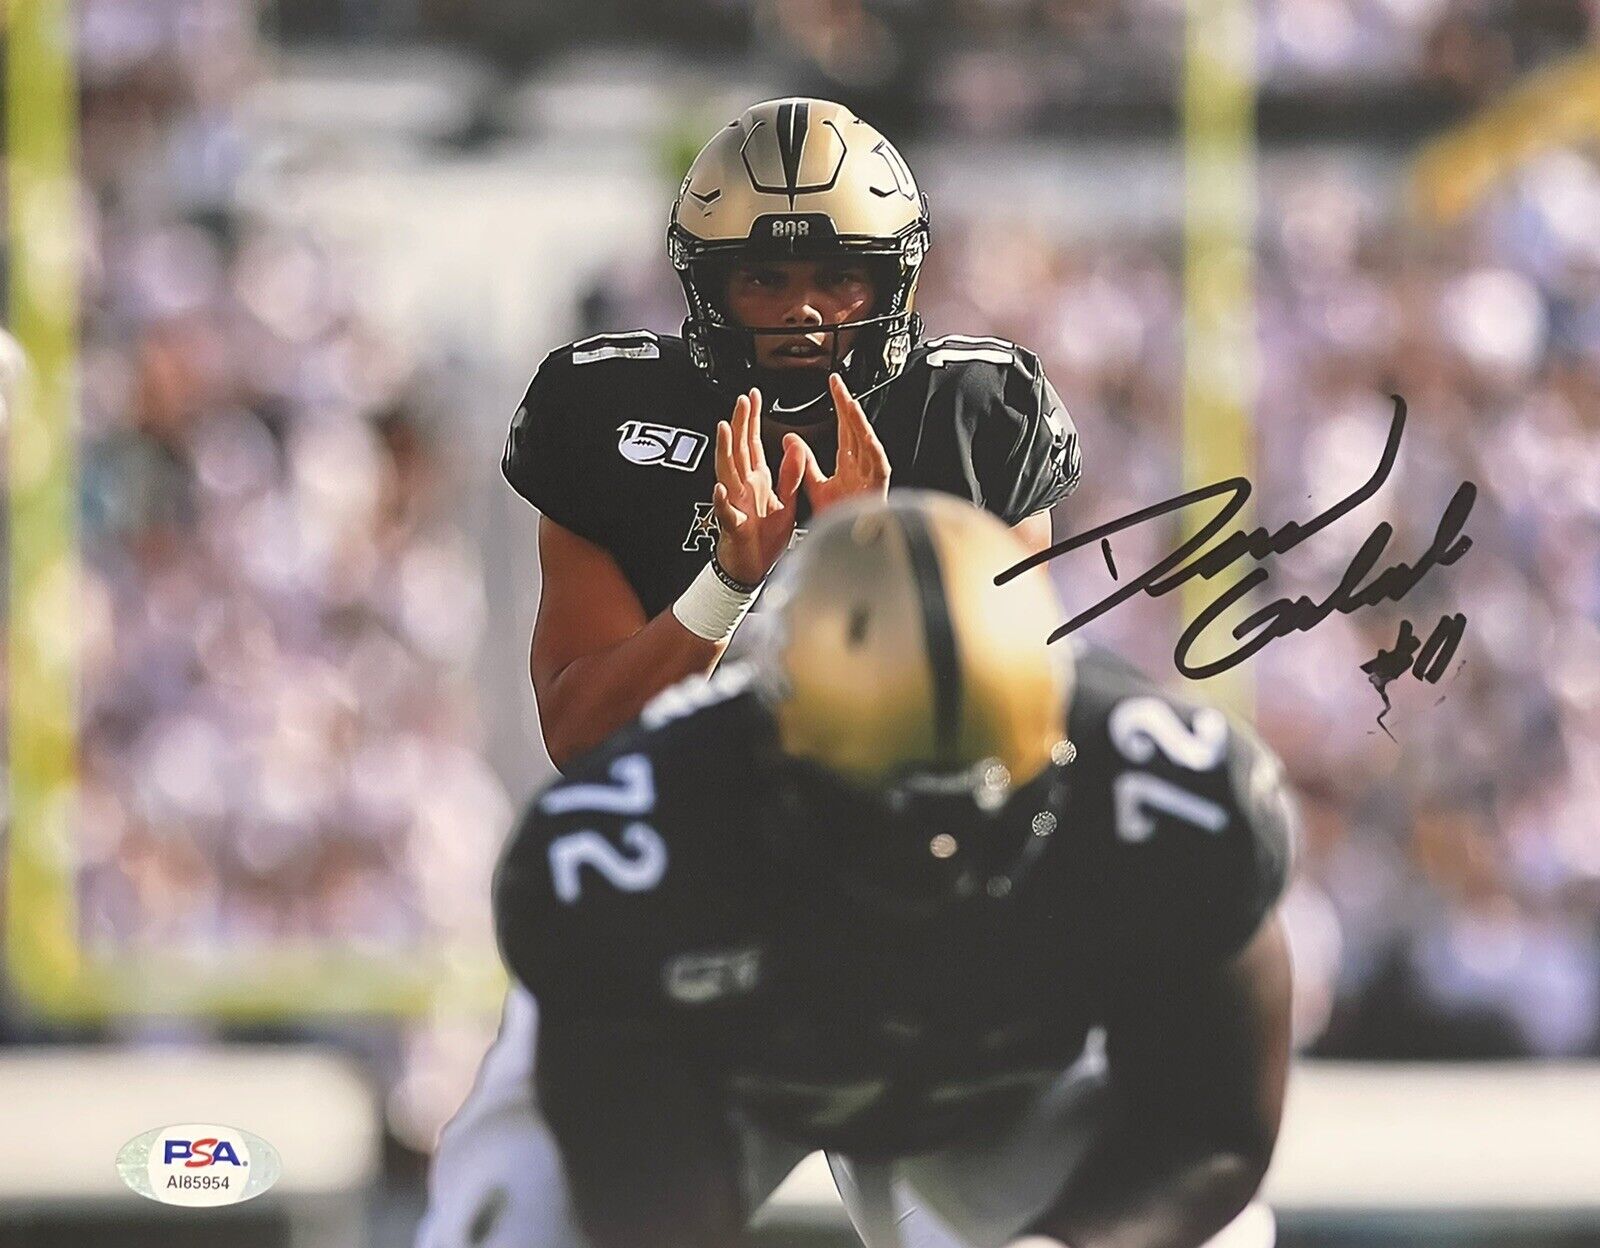 Dillon Gabriel Signed Autographed UCF Knights 8x10 Photo Poster painting PSA/DNA